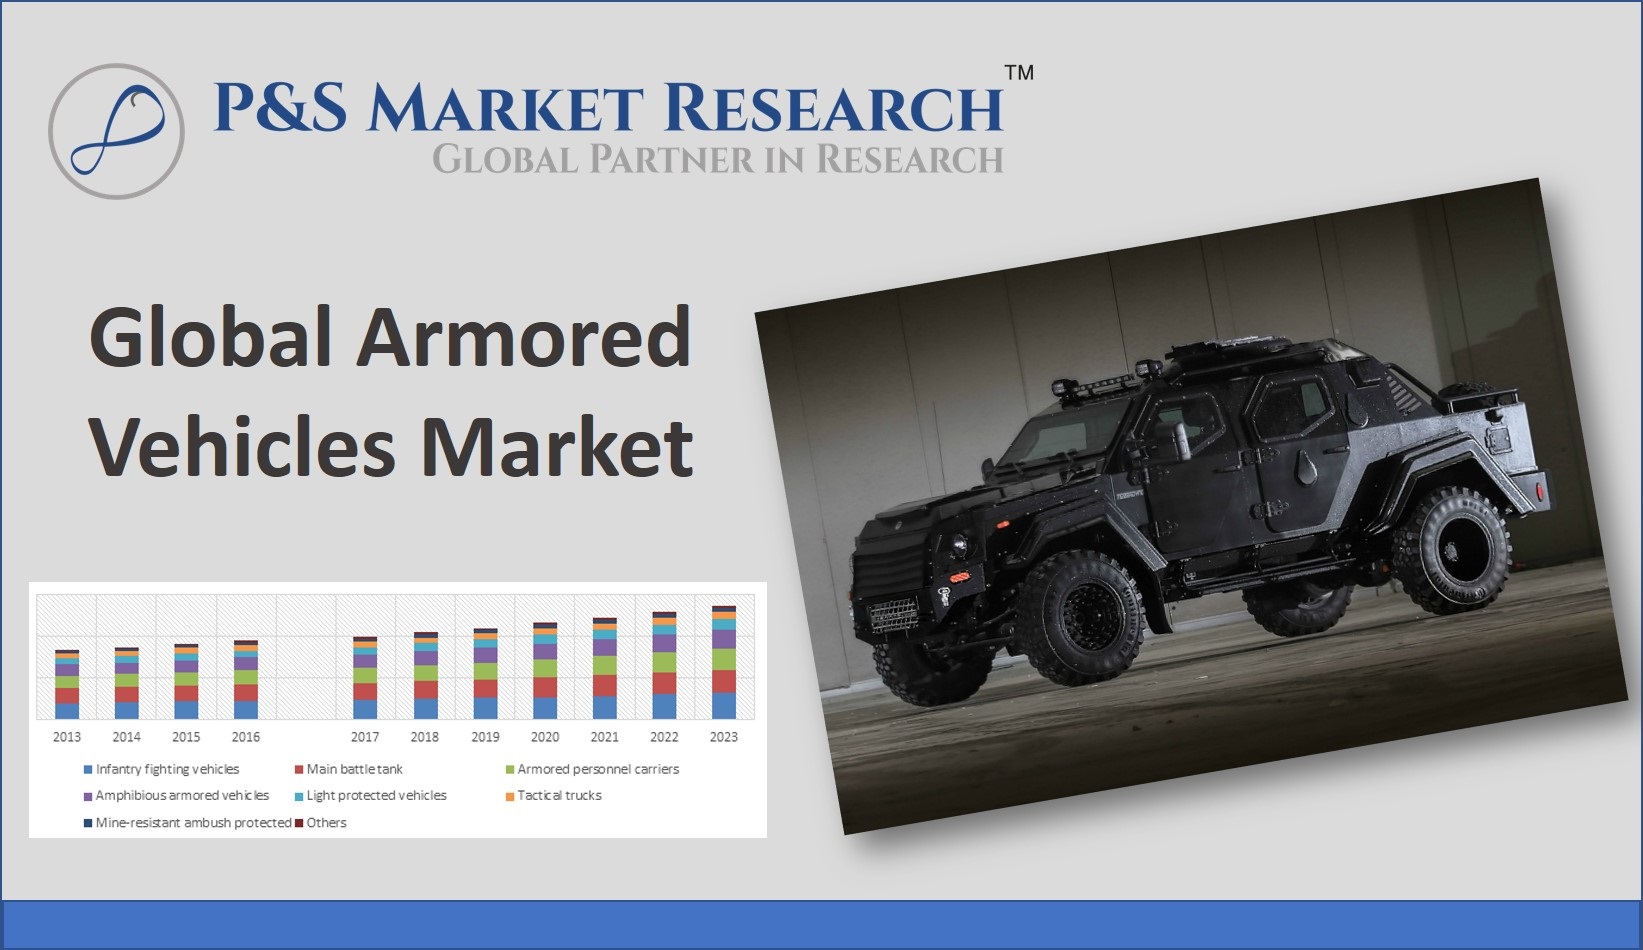 GLOBAL ARMORED VEHICLES MARKET